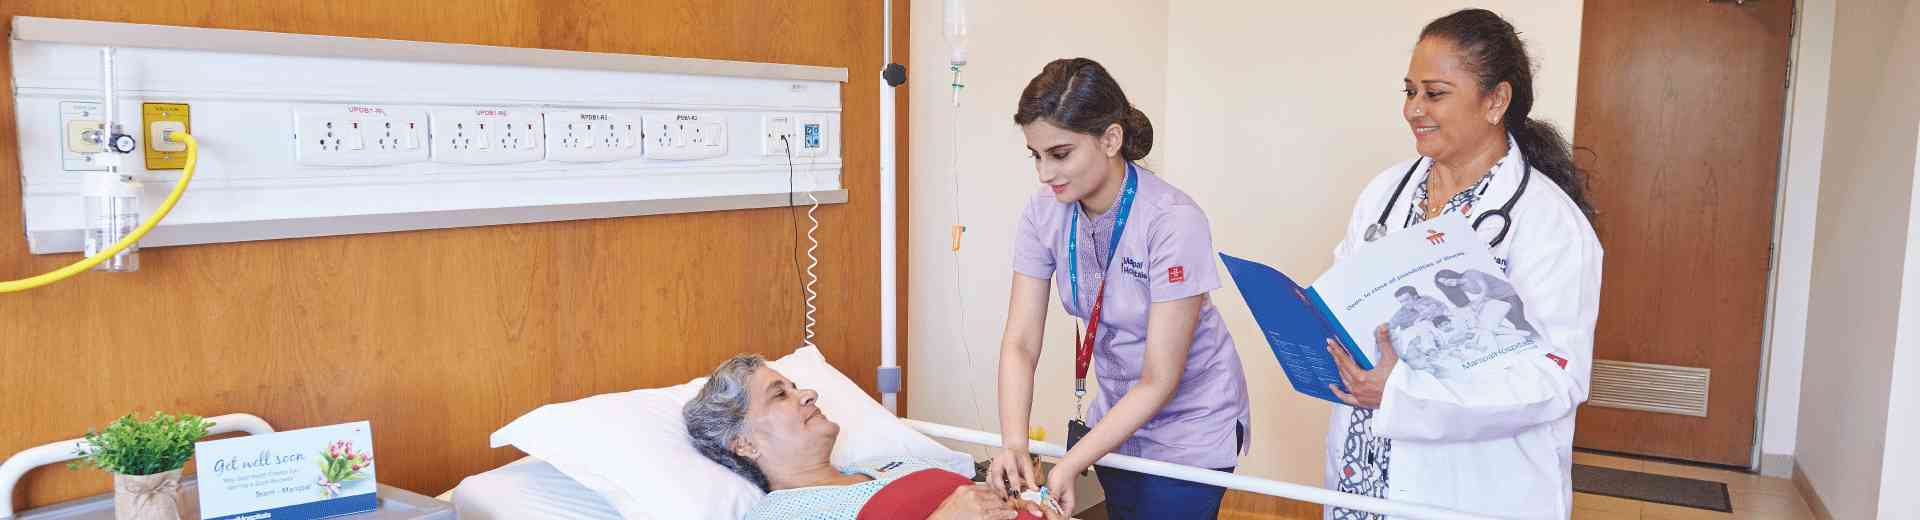 Outpatient Inpatient and Emergency services in Gurugram